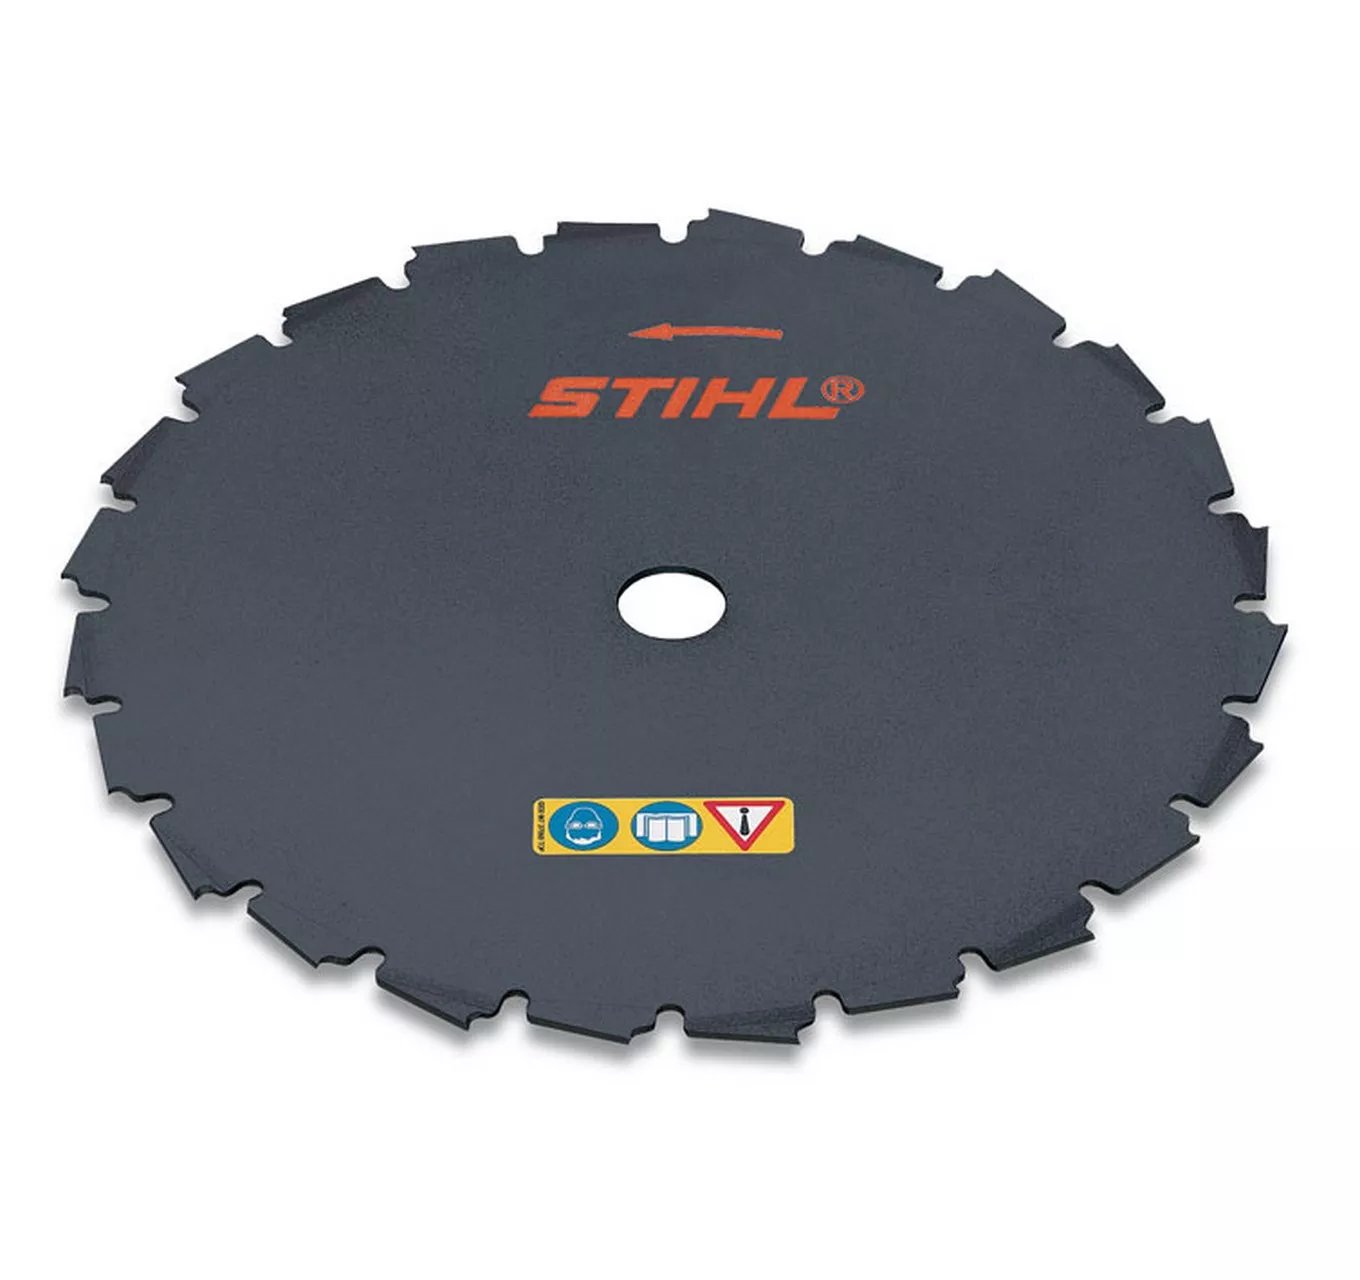 Chisel Saw Blade 200mm (22T)